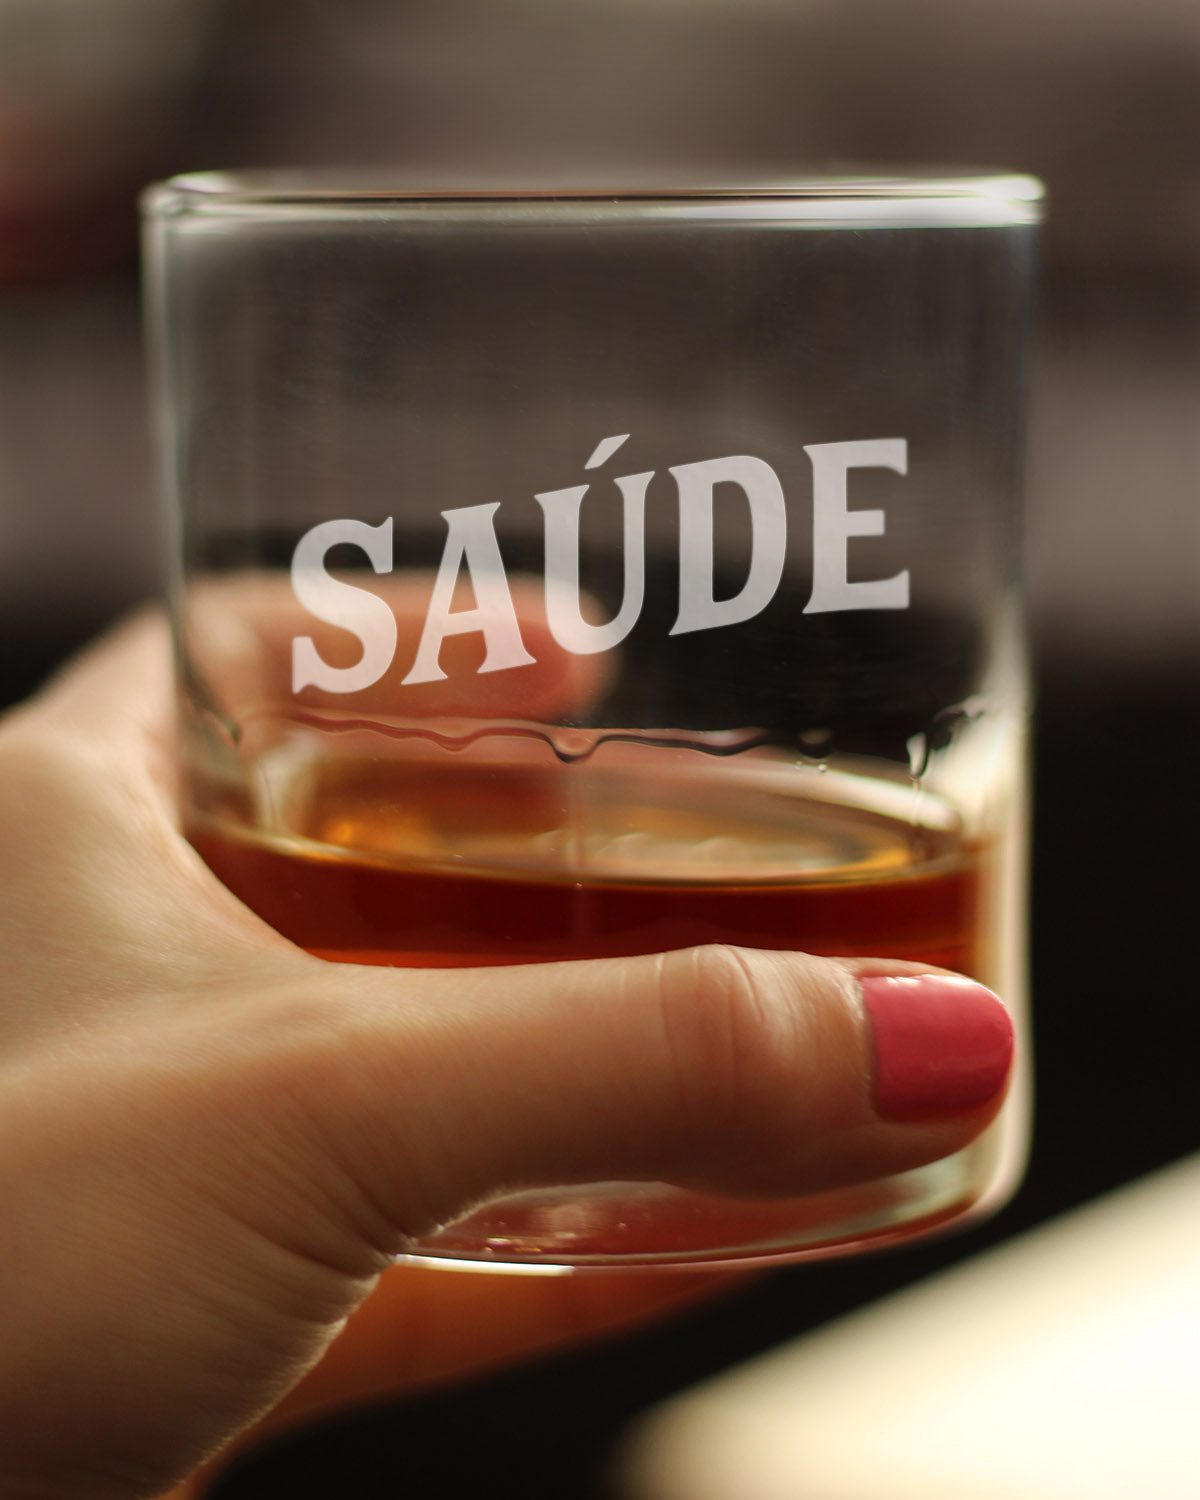 Saude - Portuguese Cheers - Whiskey Rocks Glass - Cute Portugal Themed Gifts or Party Decor for Women and Men - 10.25 Oz